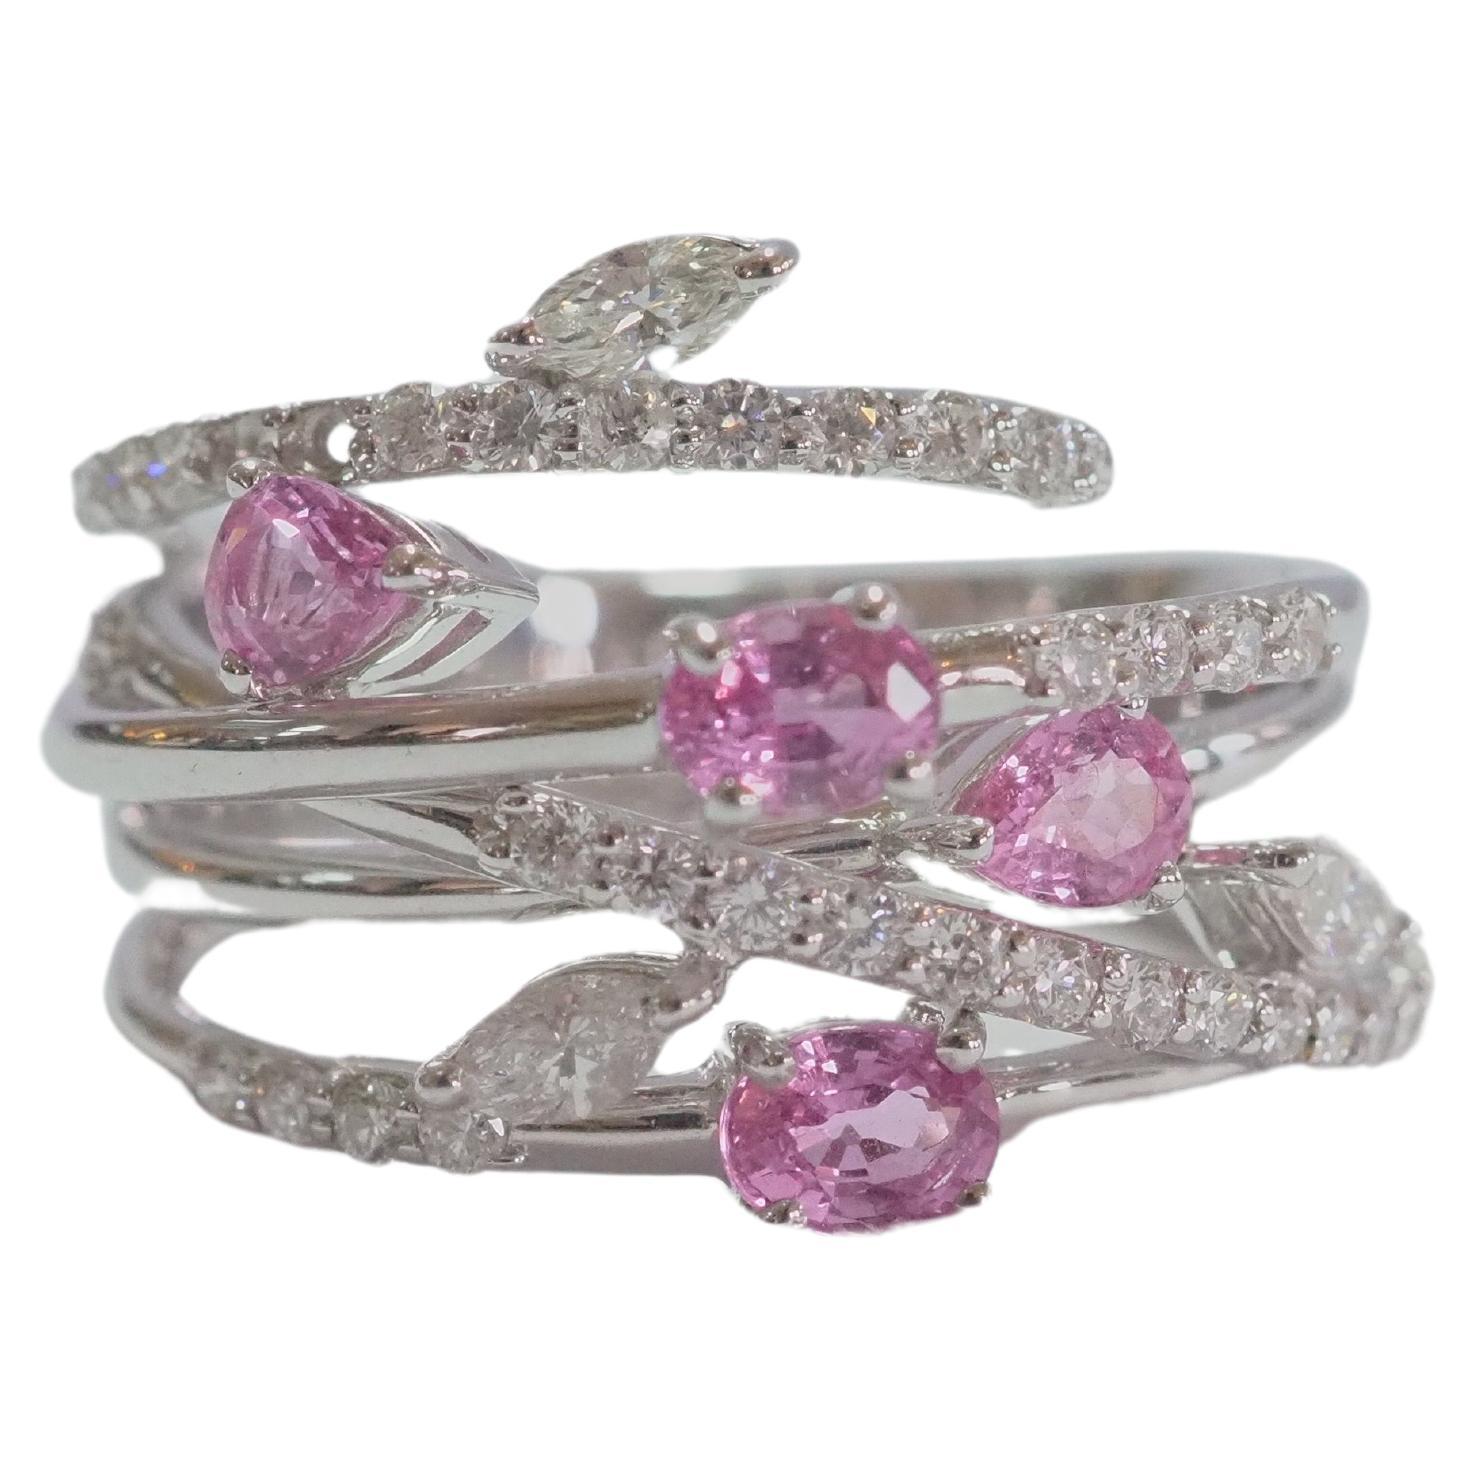 18K White Gold 0.96ct Pink Sapphires & 0.64ct Diamonds Floral Cocktail Ring